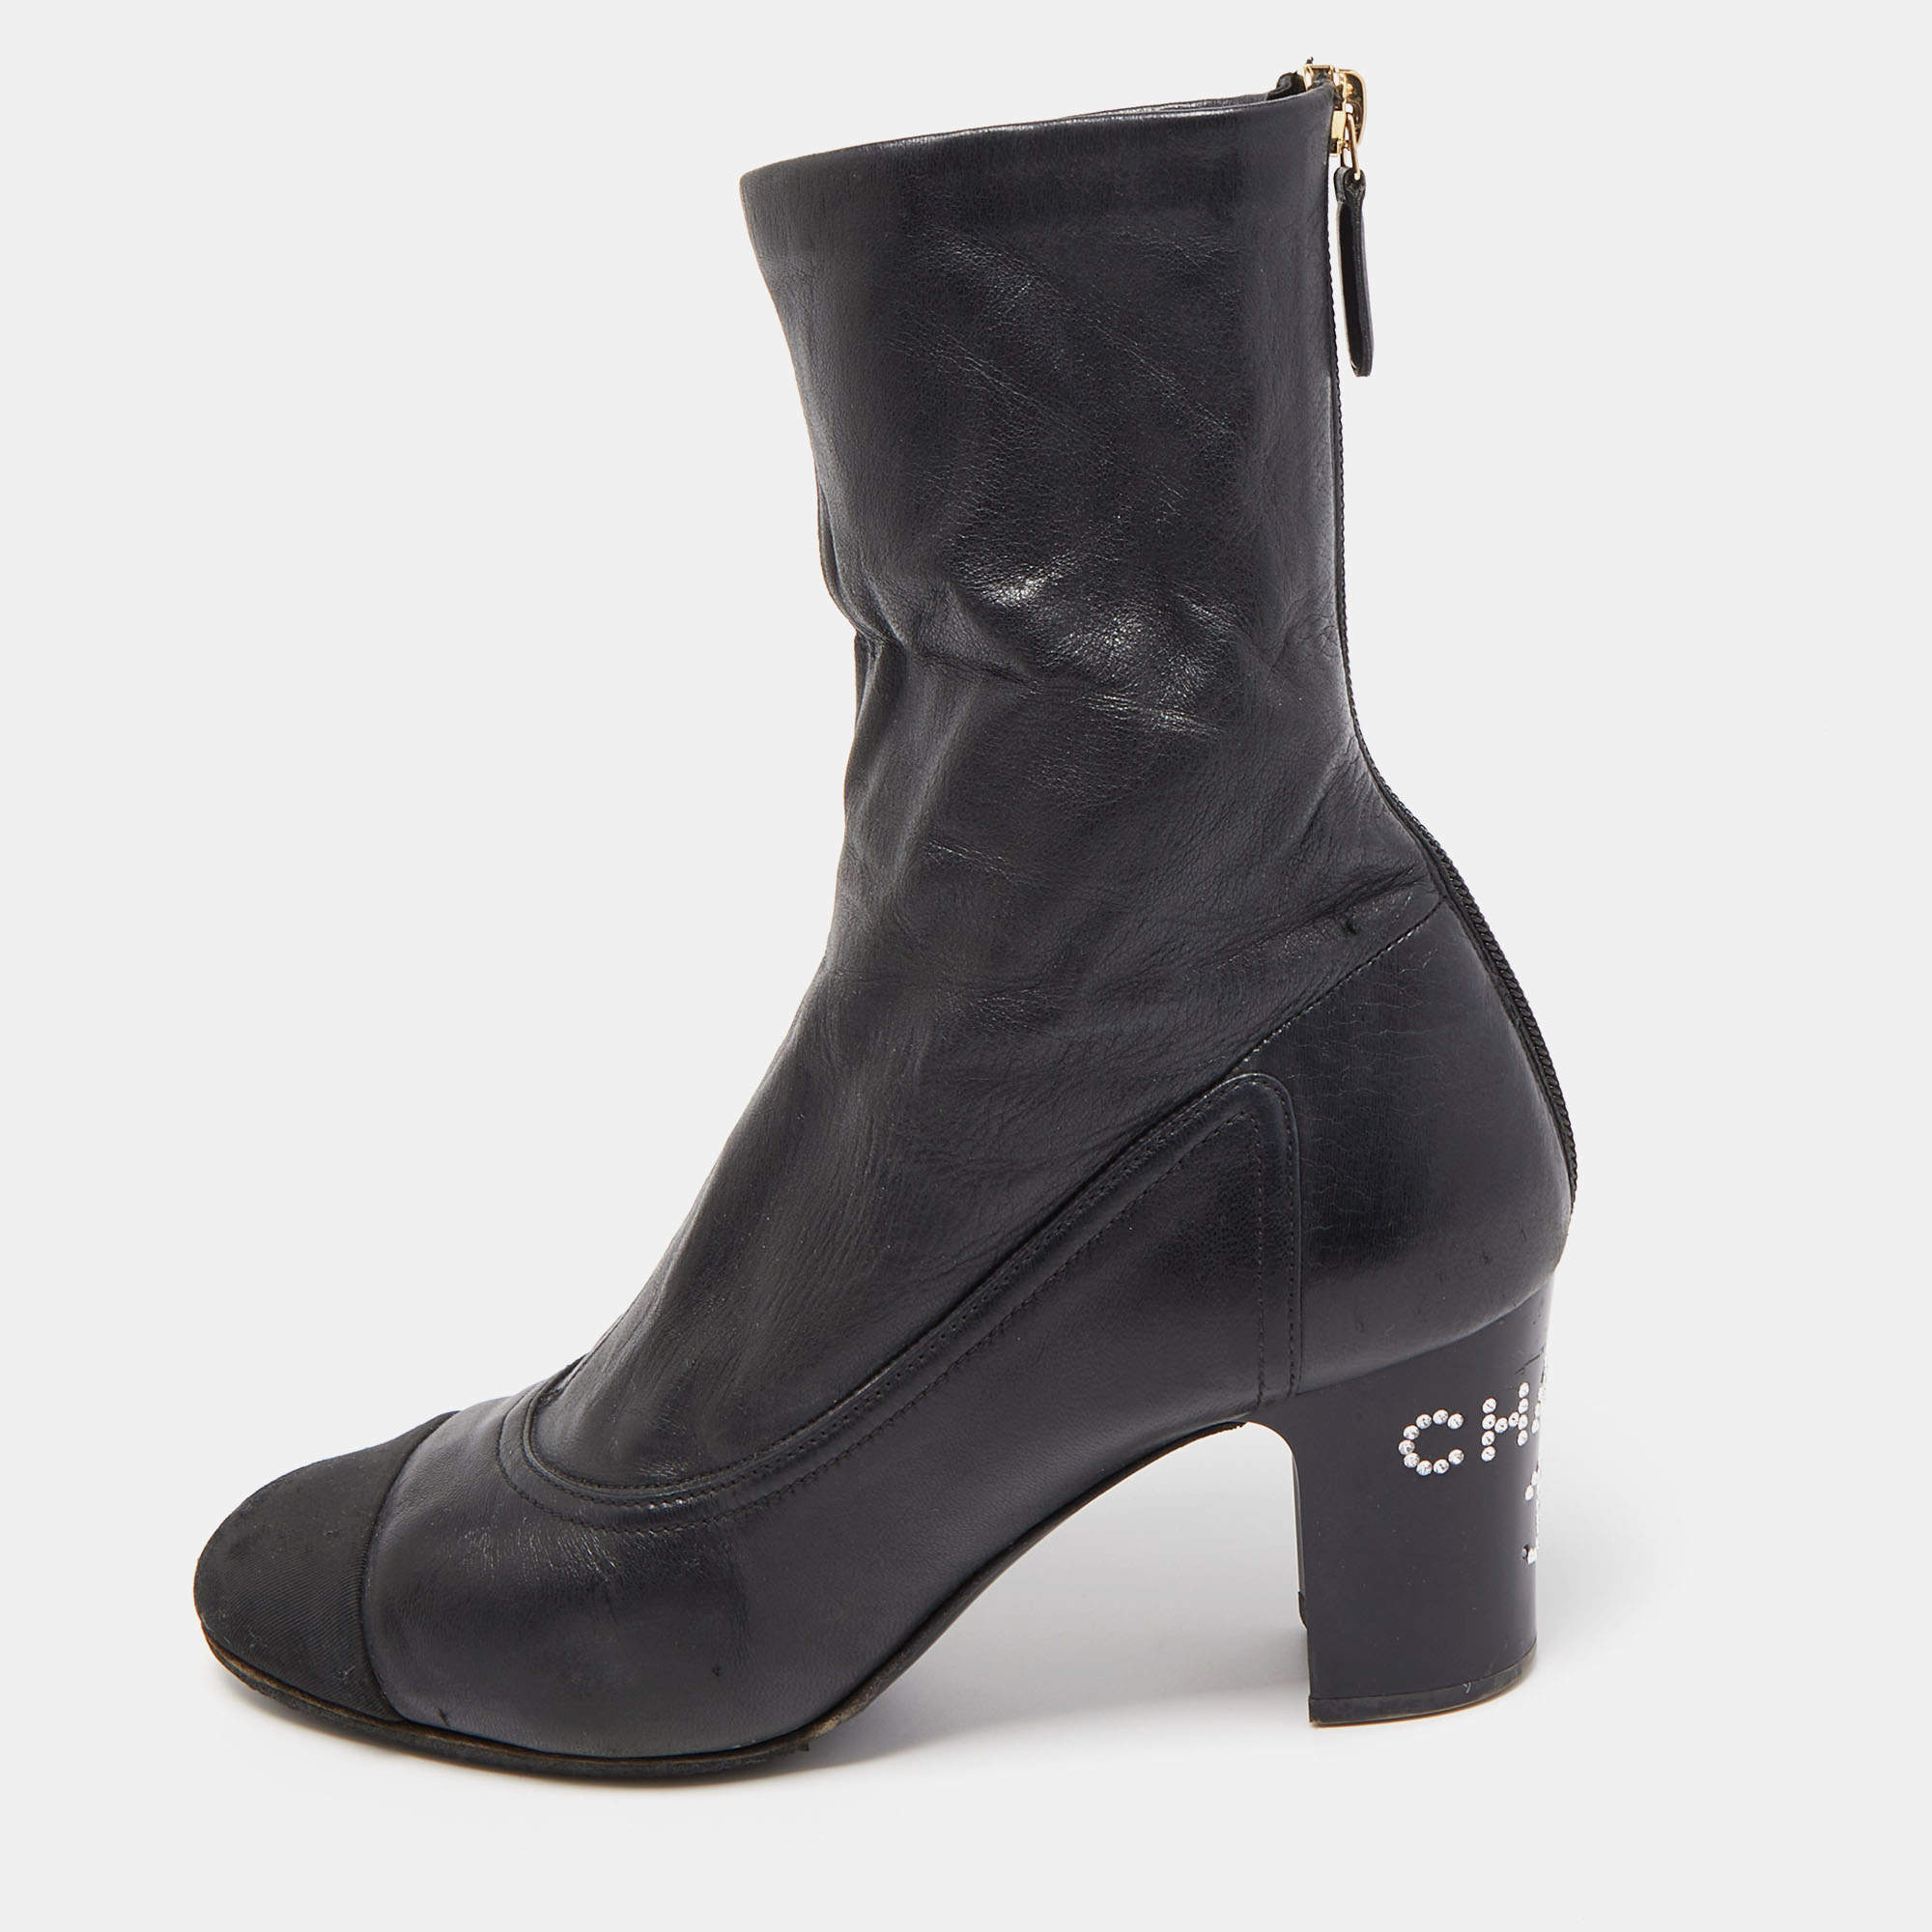 Ankle Boots Chanel Chanel Boots T.eu 39 Leather Size 39 EU